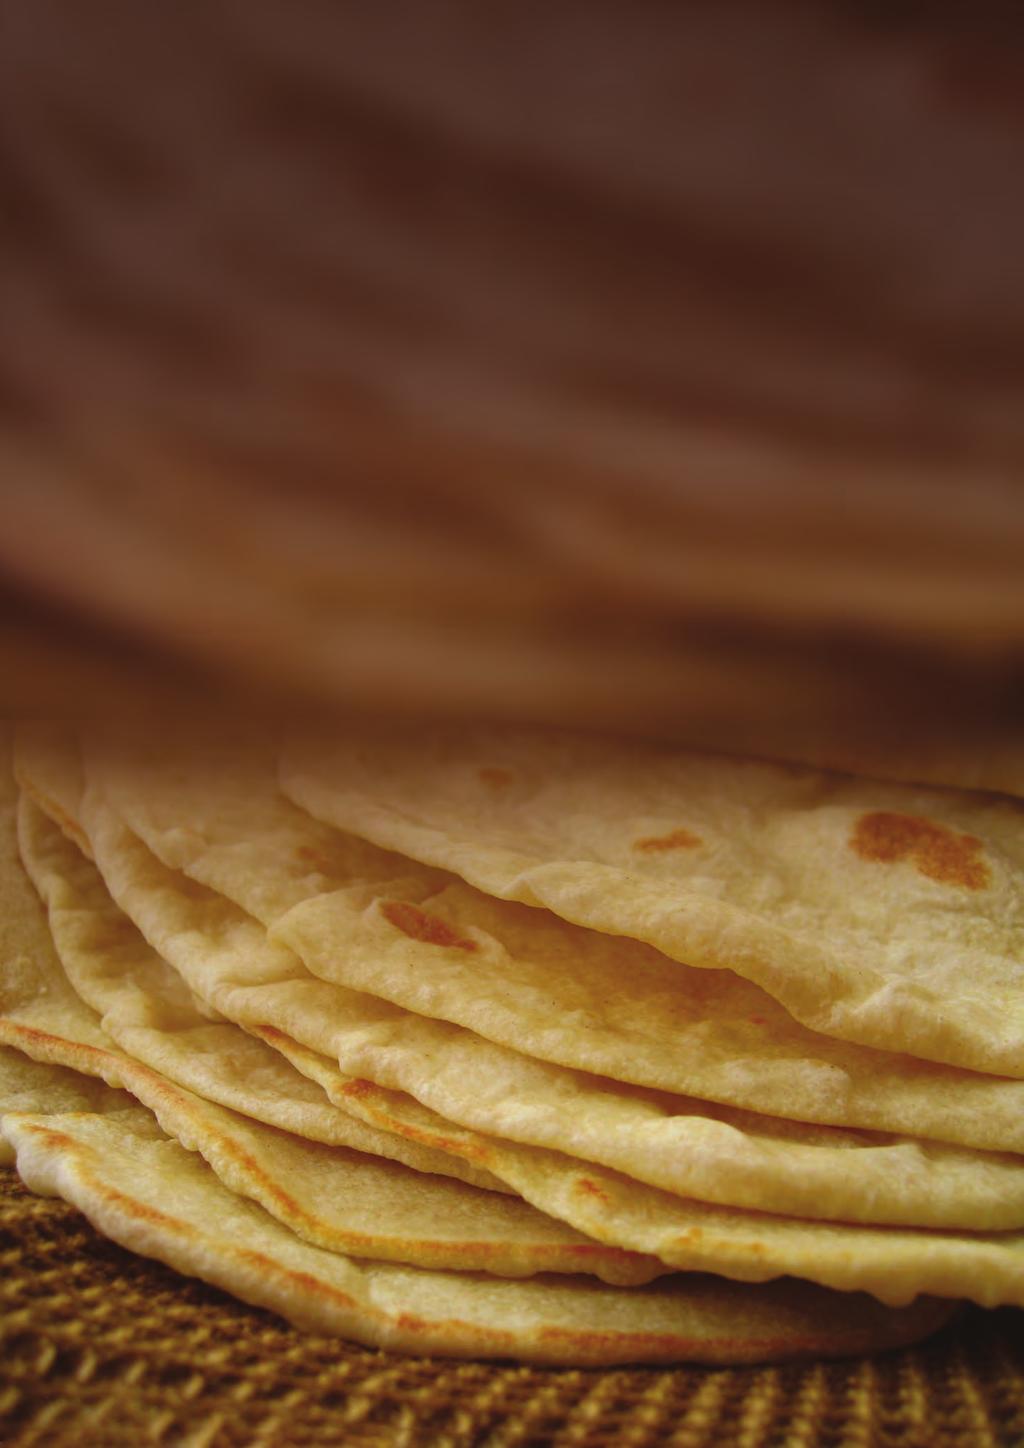 Tortilla Introduce Whole Wheat Tortillas into your diet for a healthier choice filled with the fresh-baked taste.